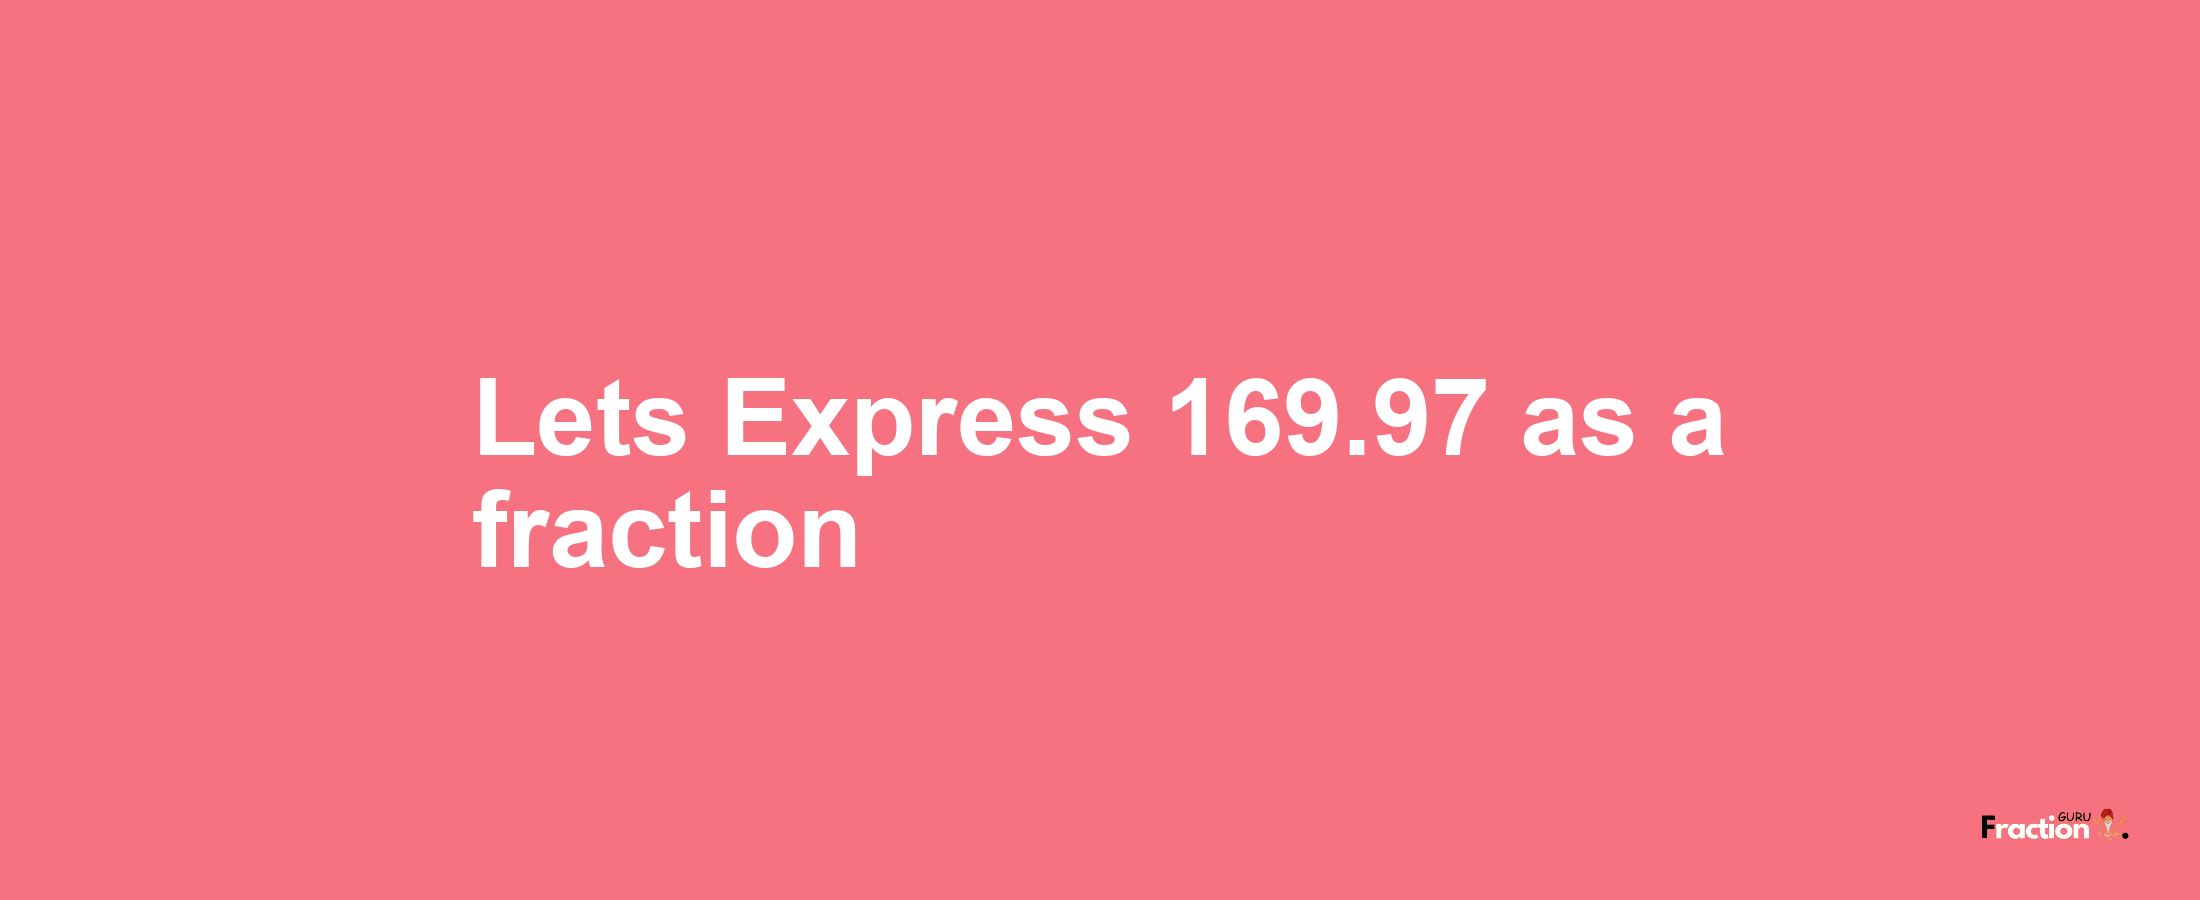 Lets Express 169.97 as afraction